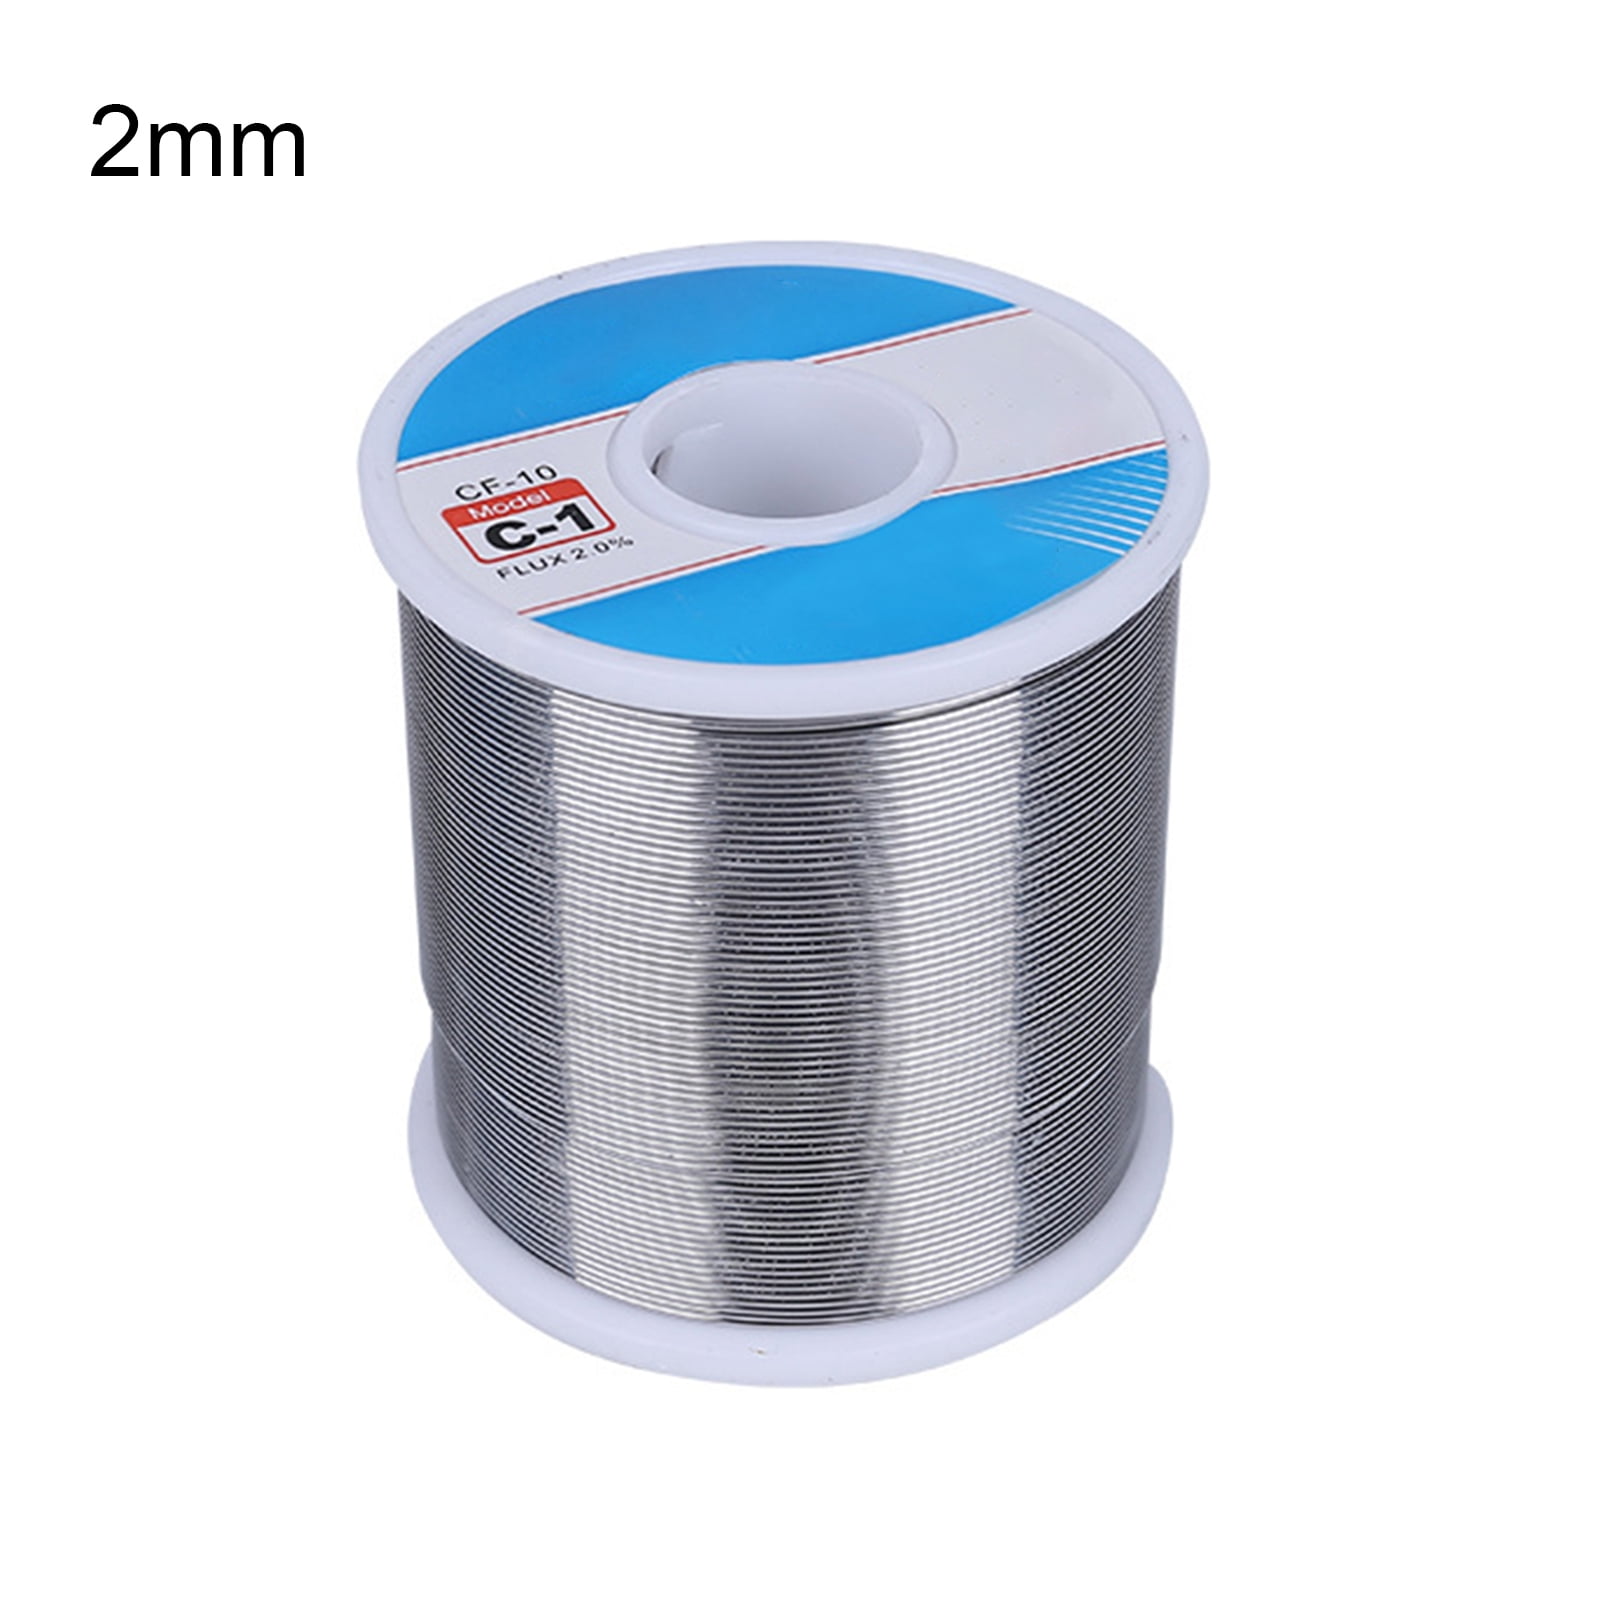 450g Locking Wire Roll 0.6 mm for Race Bikes Cars 